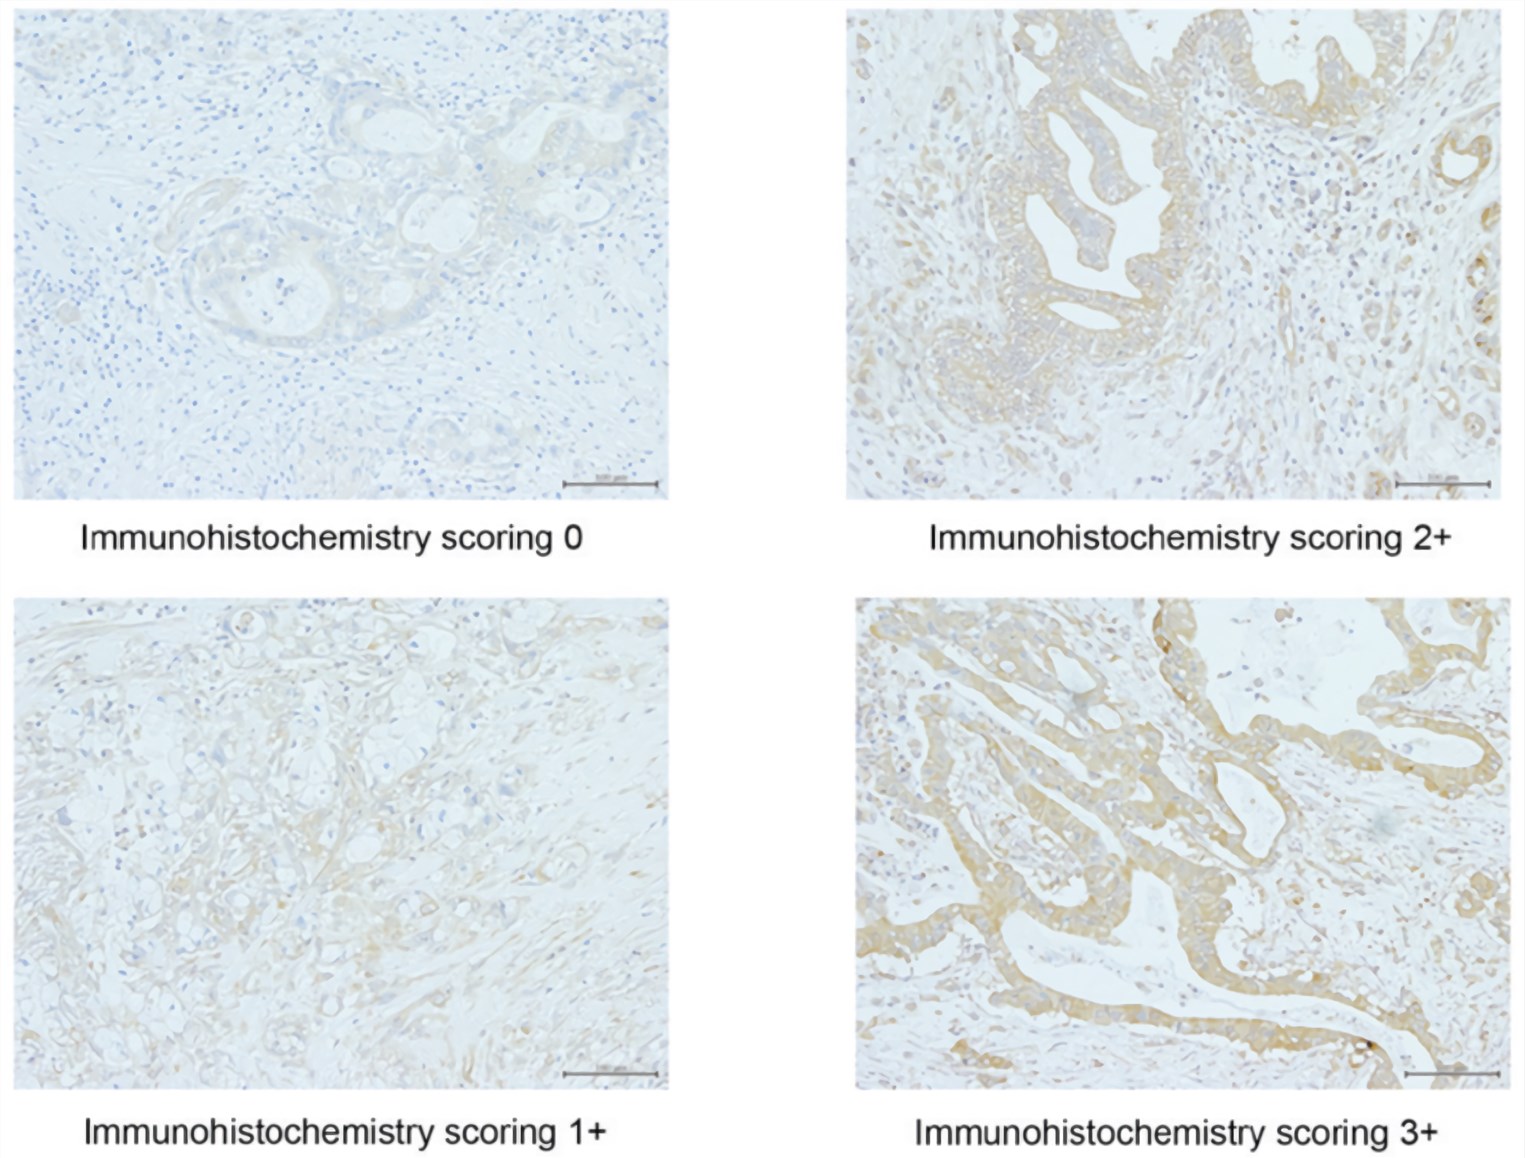 Representative results of the immunohistochemical staining of RRM1 in tissue samples from patients with pancreatic cancer (scale bar, 100 µm).